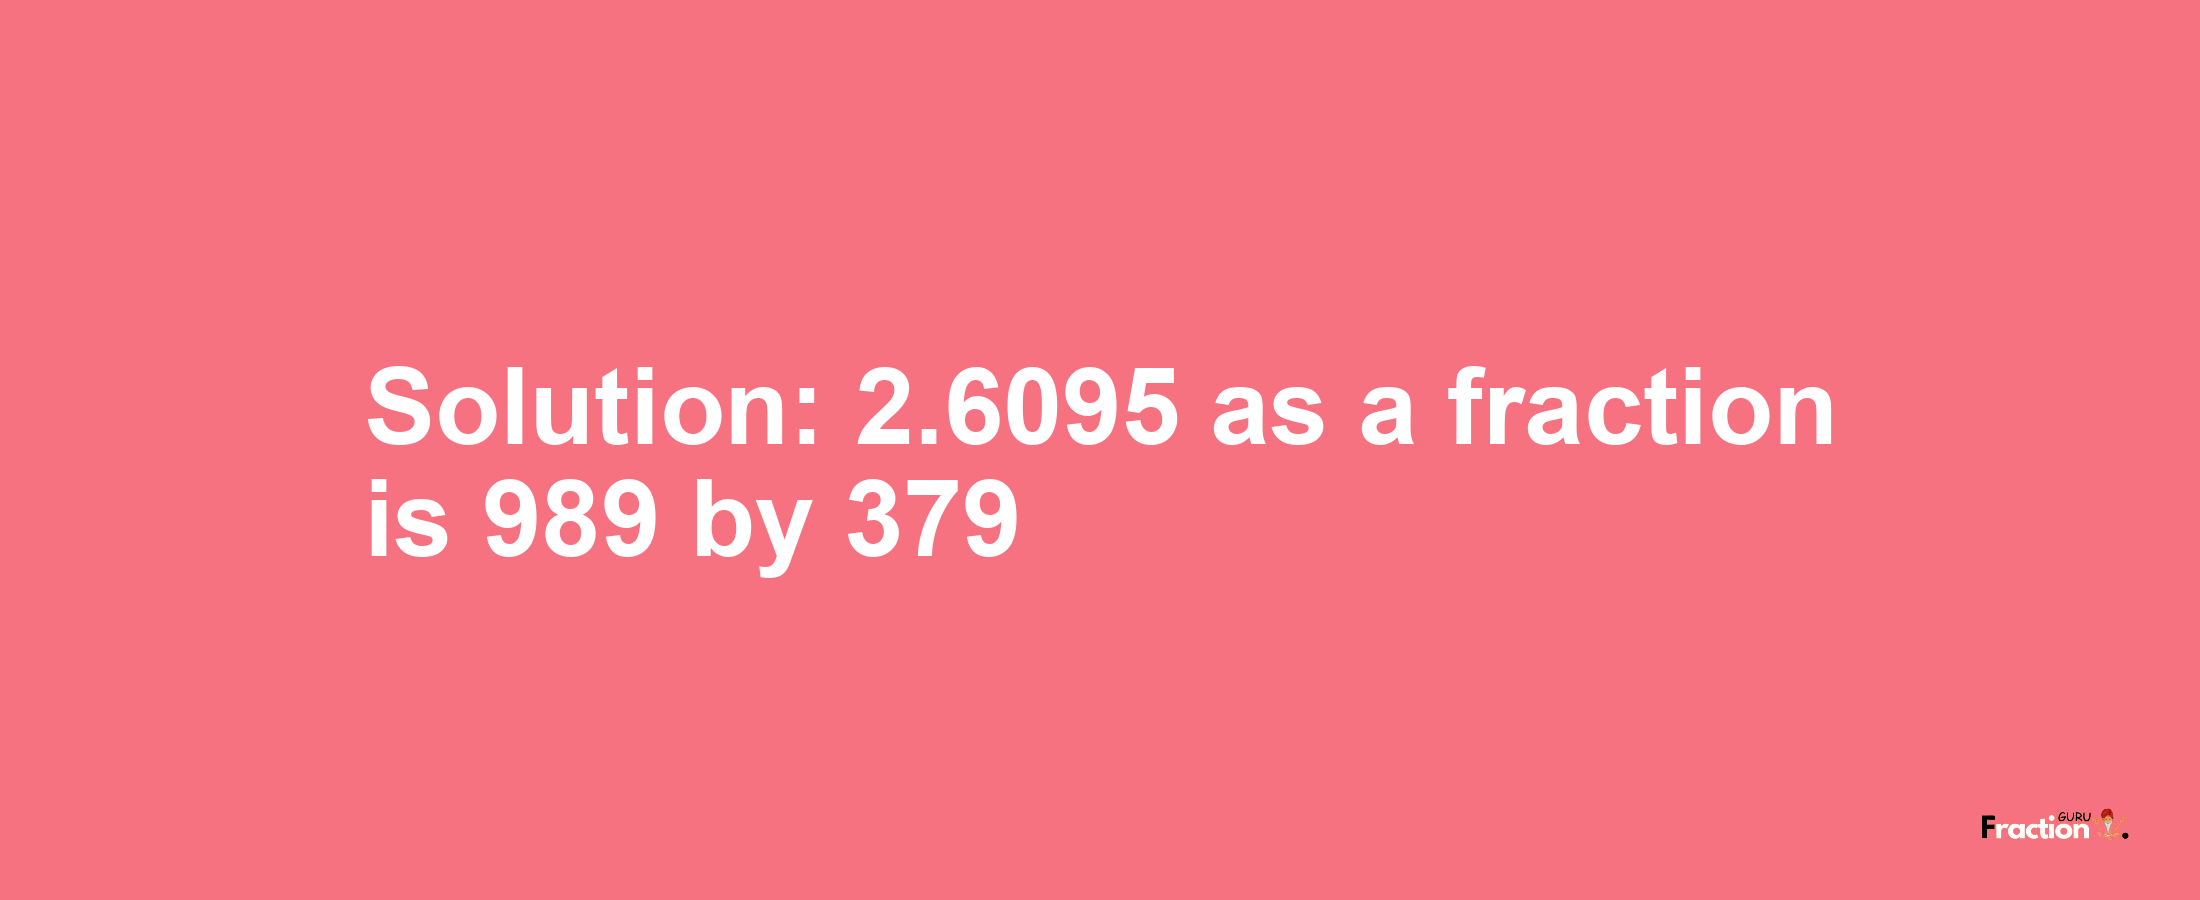 Solution:2.6095 as a fraction is 989/379